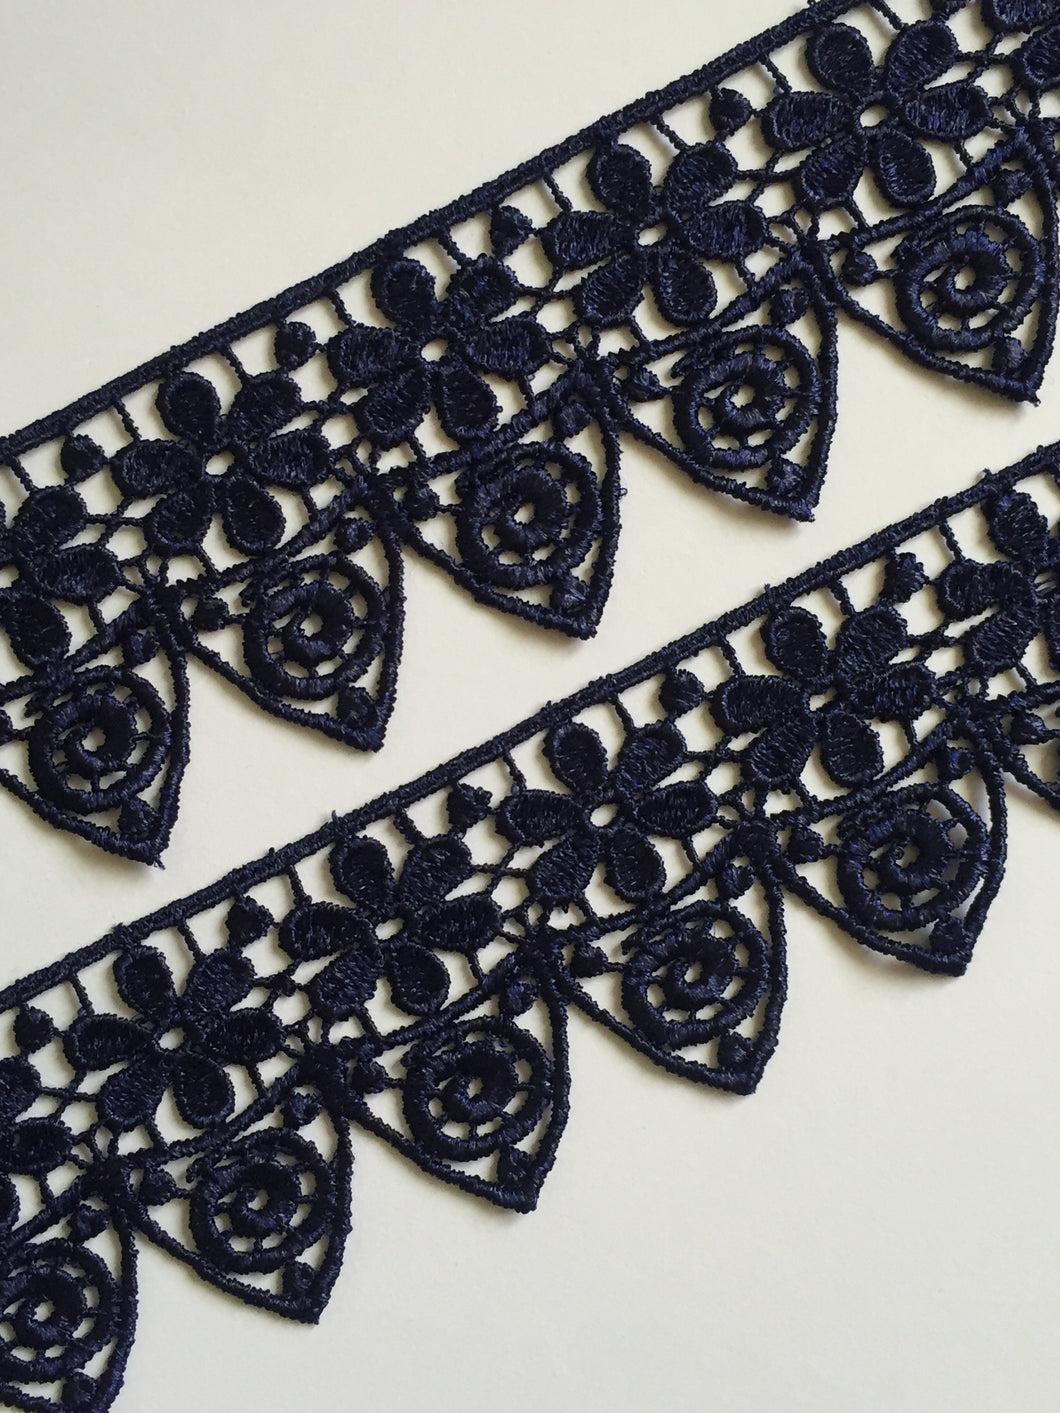 1 yard NAVY Lace Trims 49mm Wide Embroidered Guipure Trimmings Cardmaking Wedding Home Decor Sewing Craft Projects